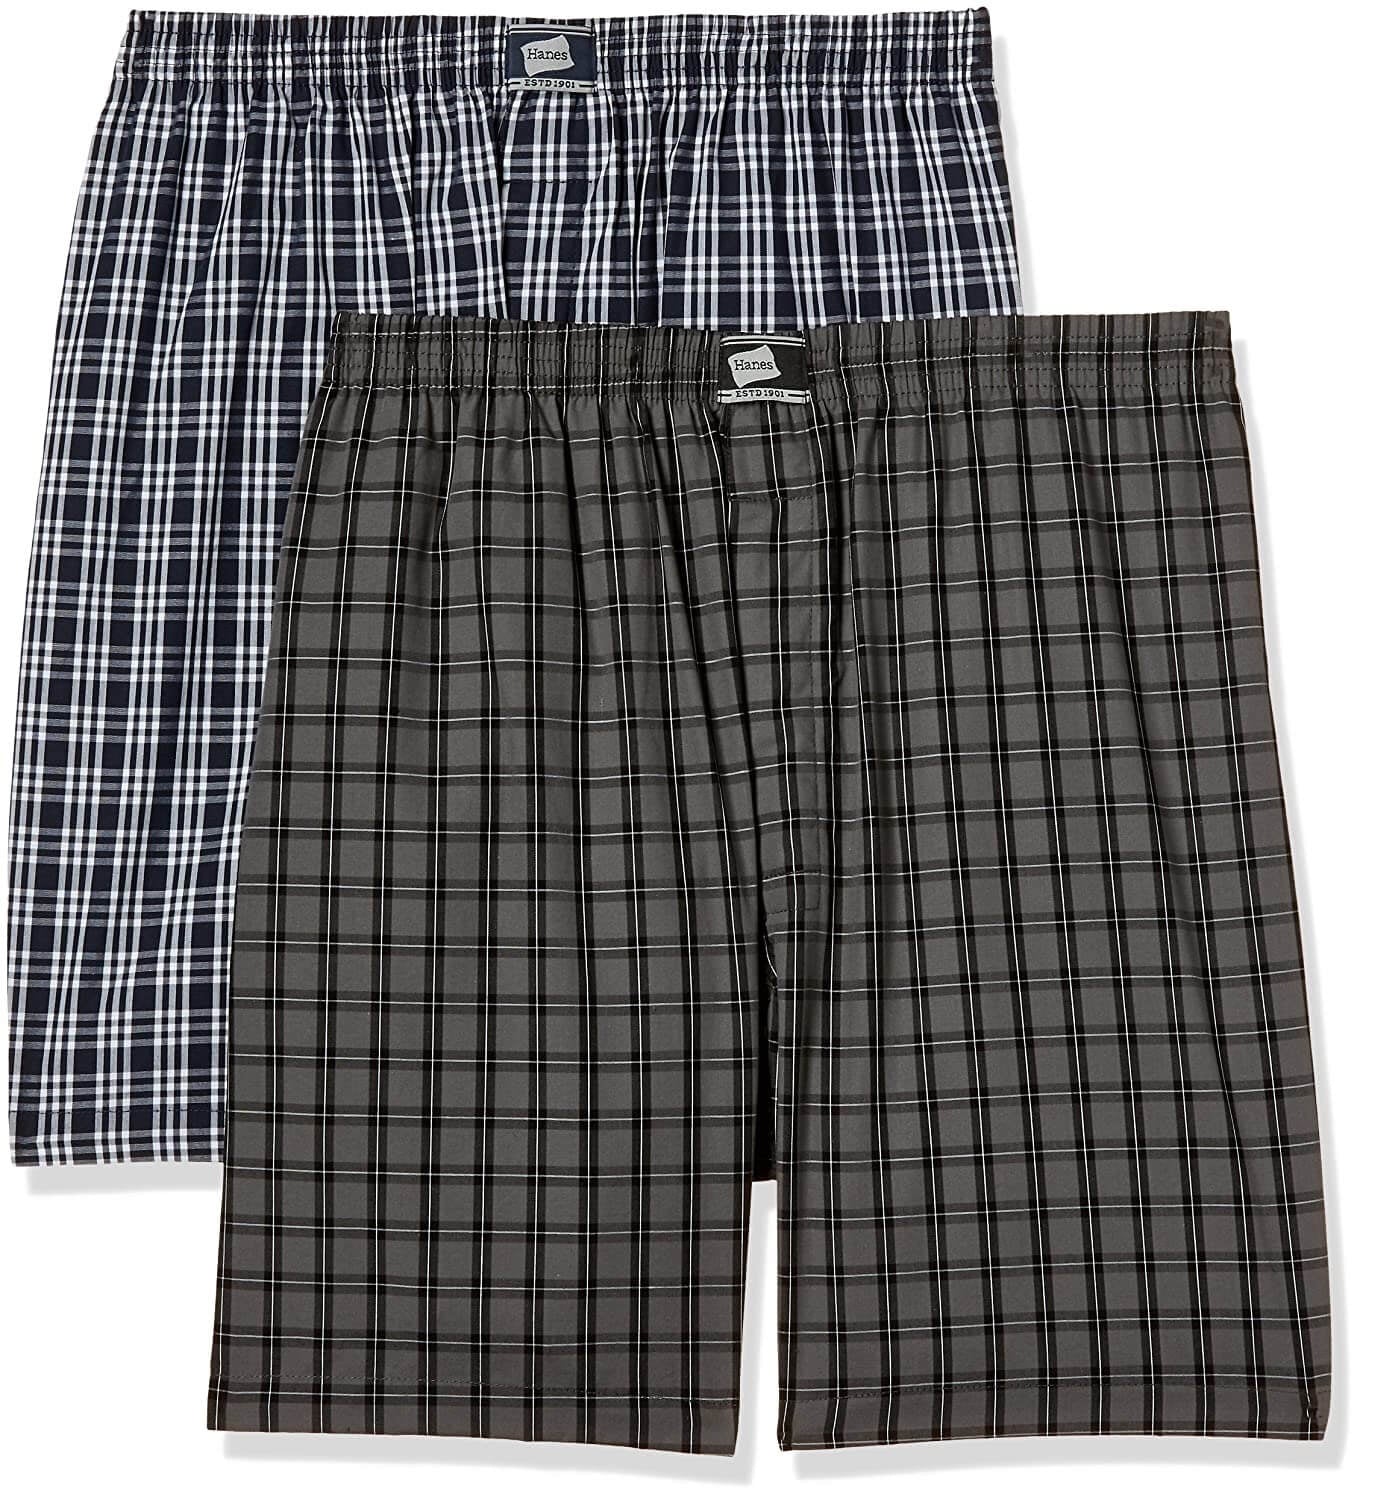 Hanes Assorted Pack of 2 Checkered Boxers for Men #P108